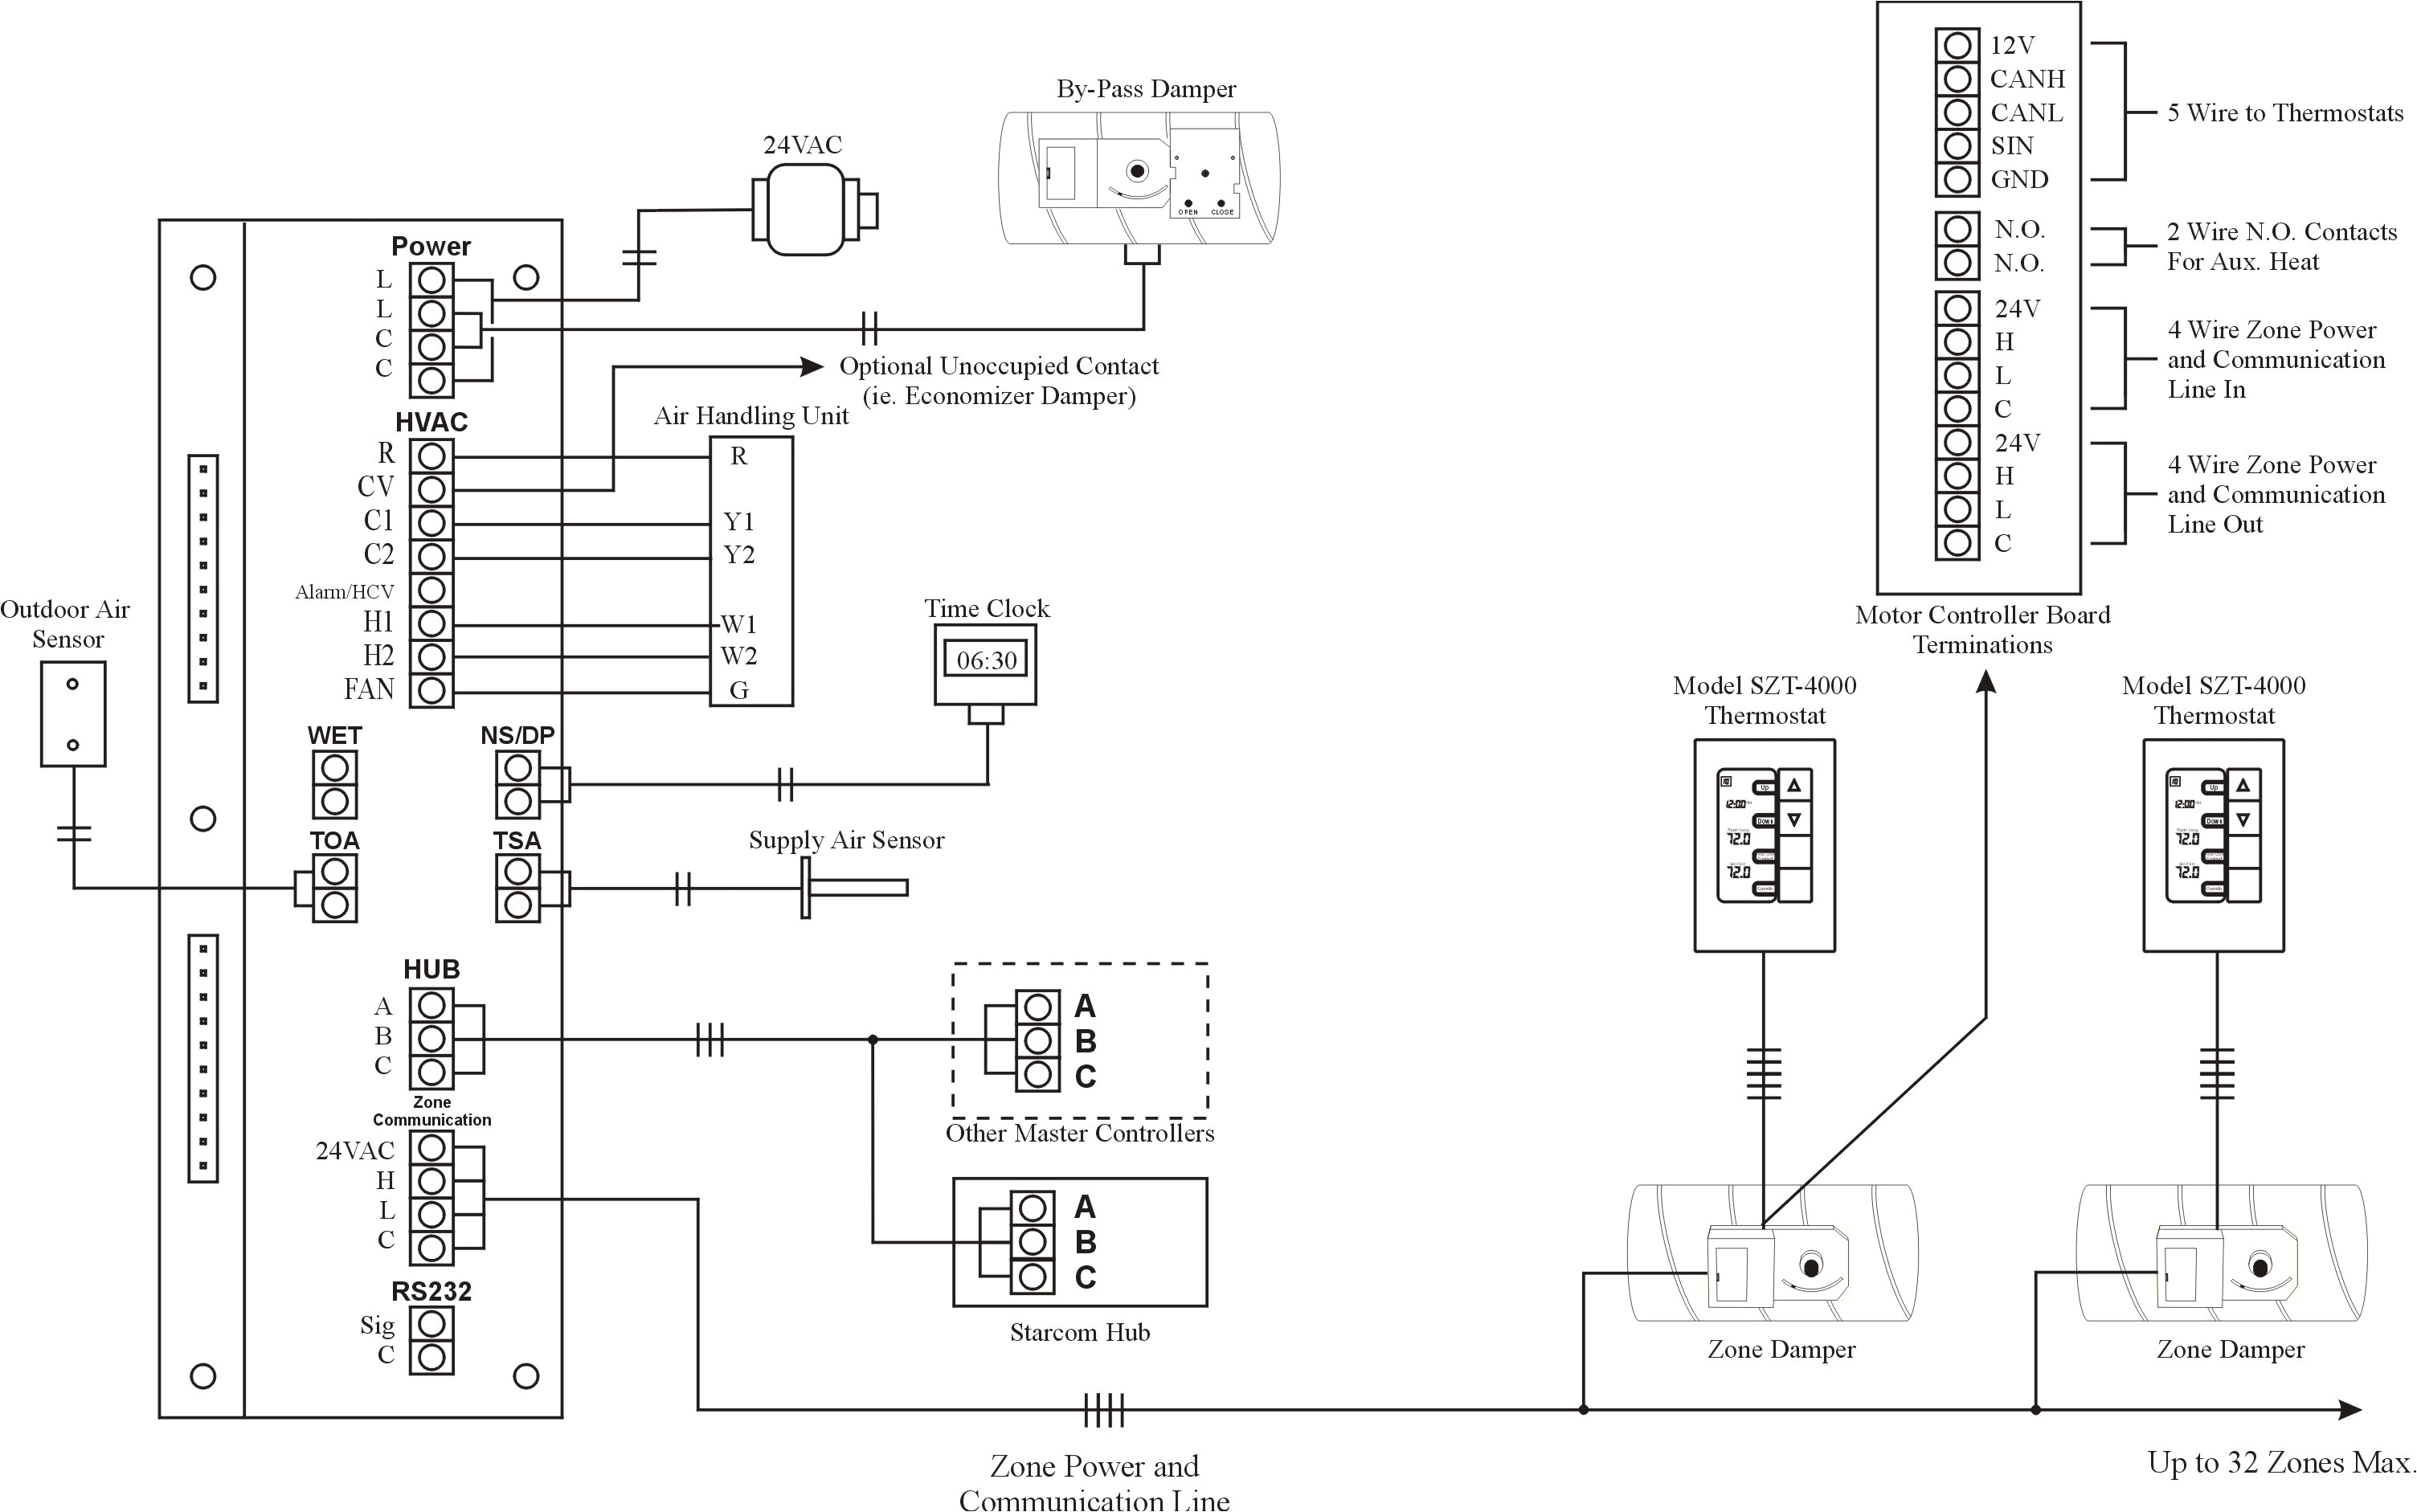 adt fire alarm wiring diagrams blog wiring diagram adt wiring diagram wiring diagram operations adt fire